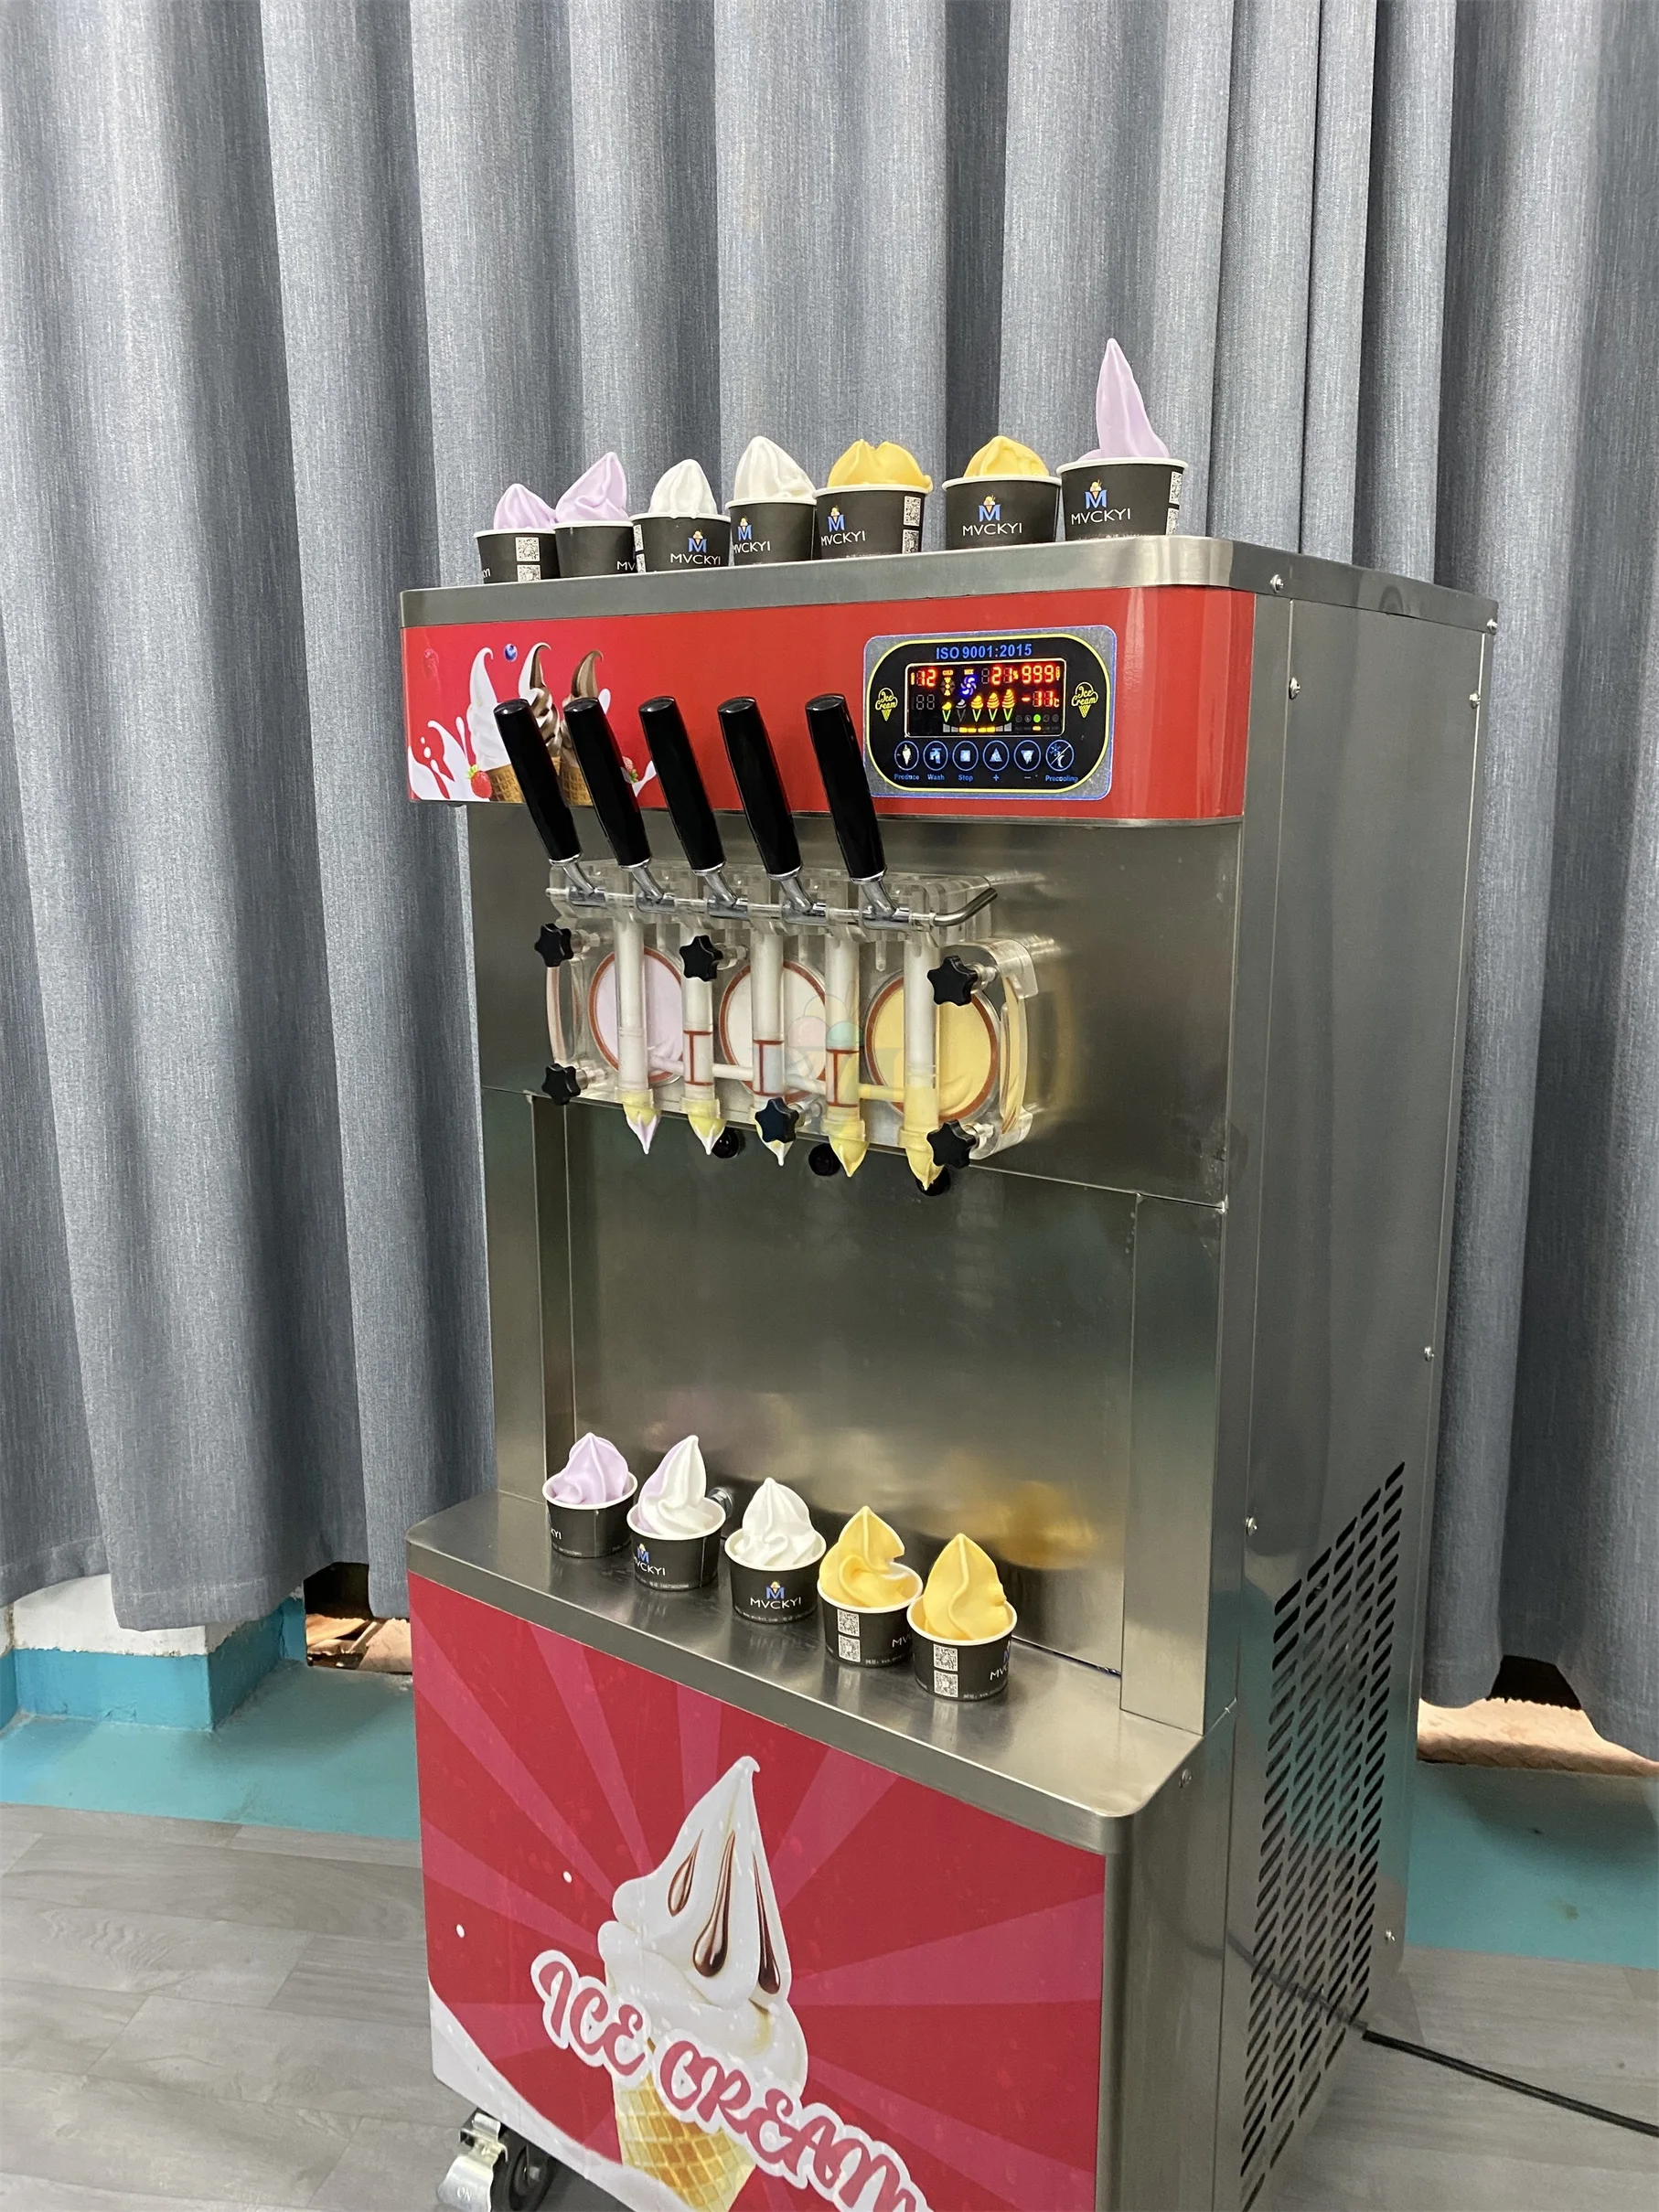 Mvckyi Commercial Freezing Equipment  3+2 Mixer Flavors Soft Serve Ice Cream Machine With Air Pump Soft Serve Ice Cream Machine